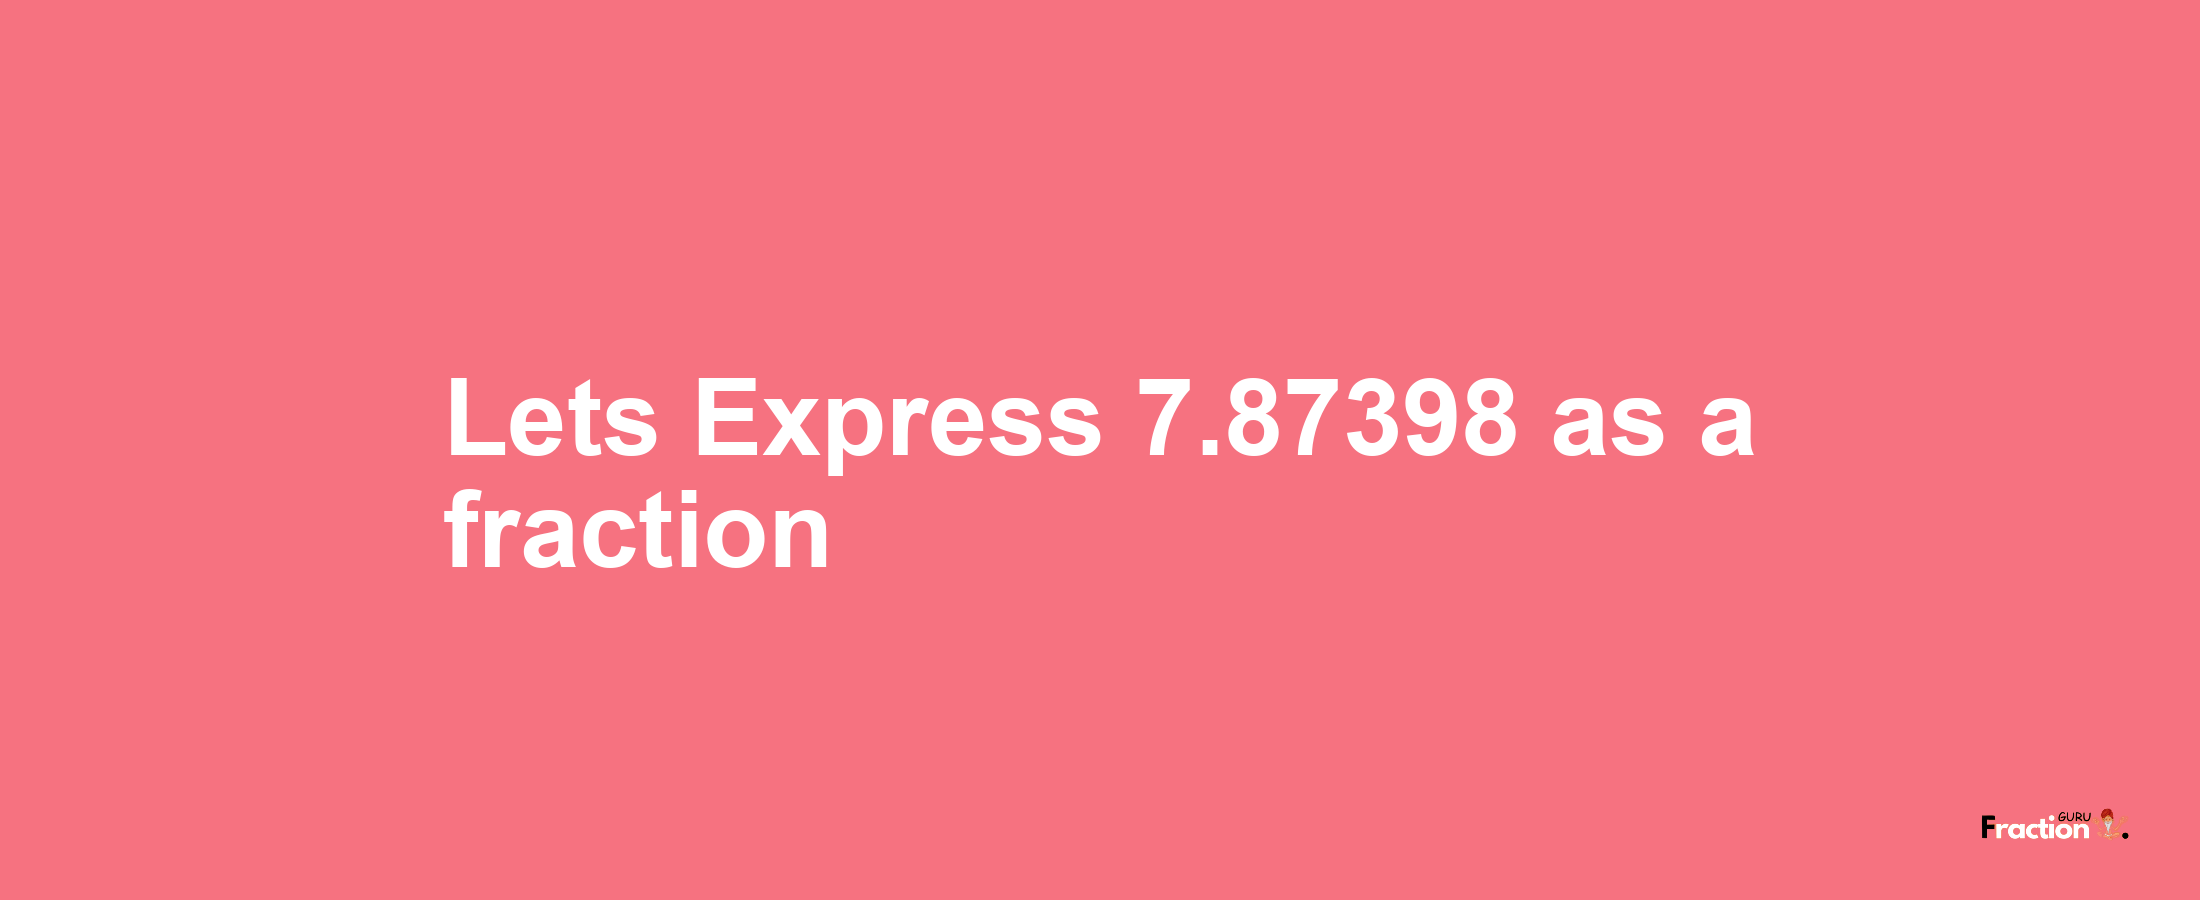 Lets Express 7.87398 as afraction